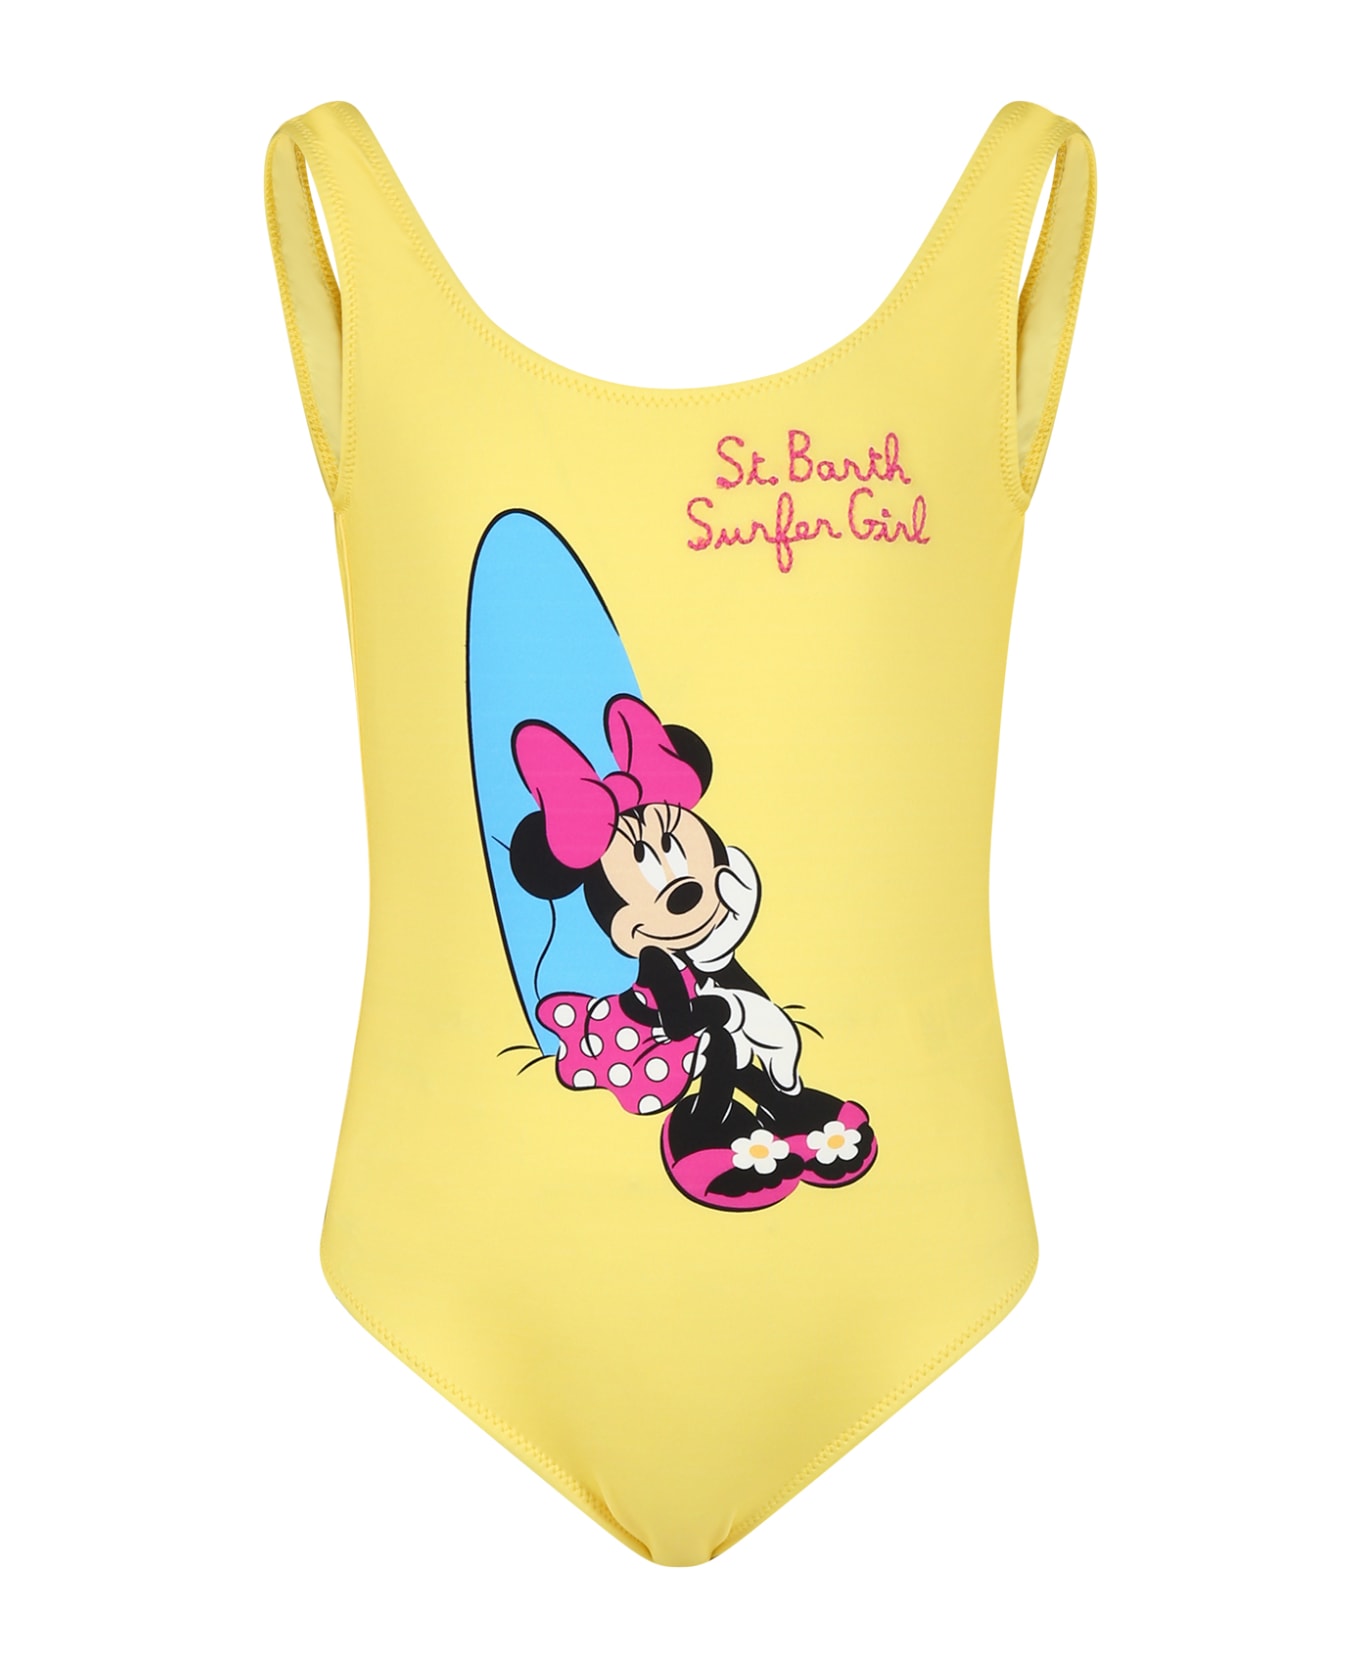 MC2 Saint Barth Yellow Swimsuit For Girl With Minnie - Yellow